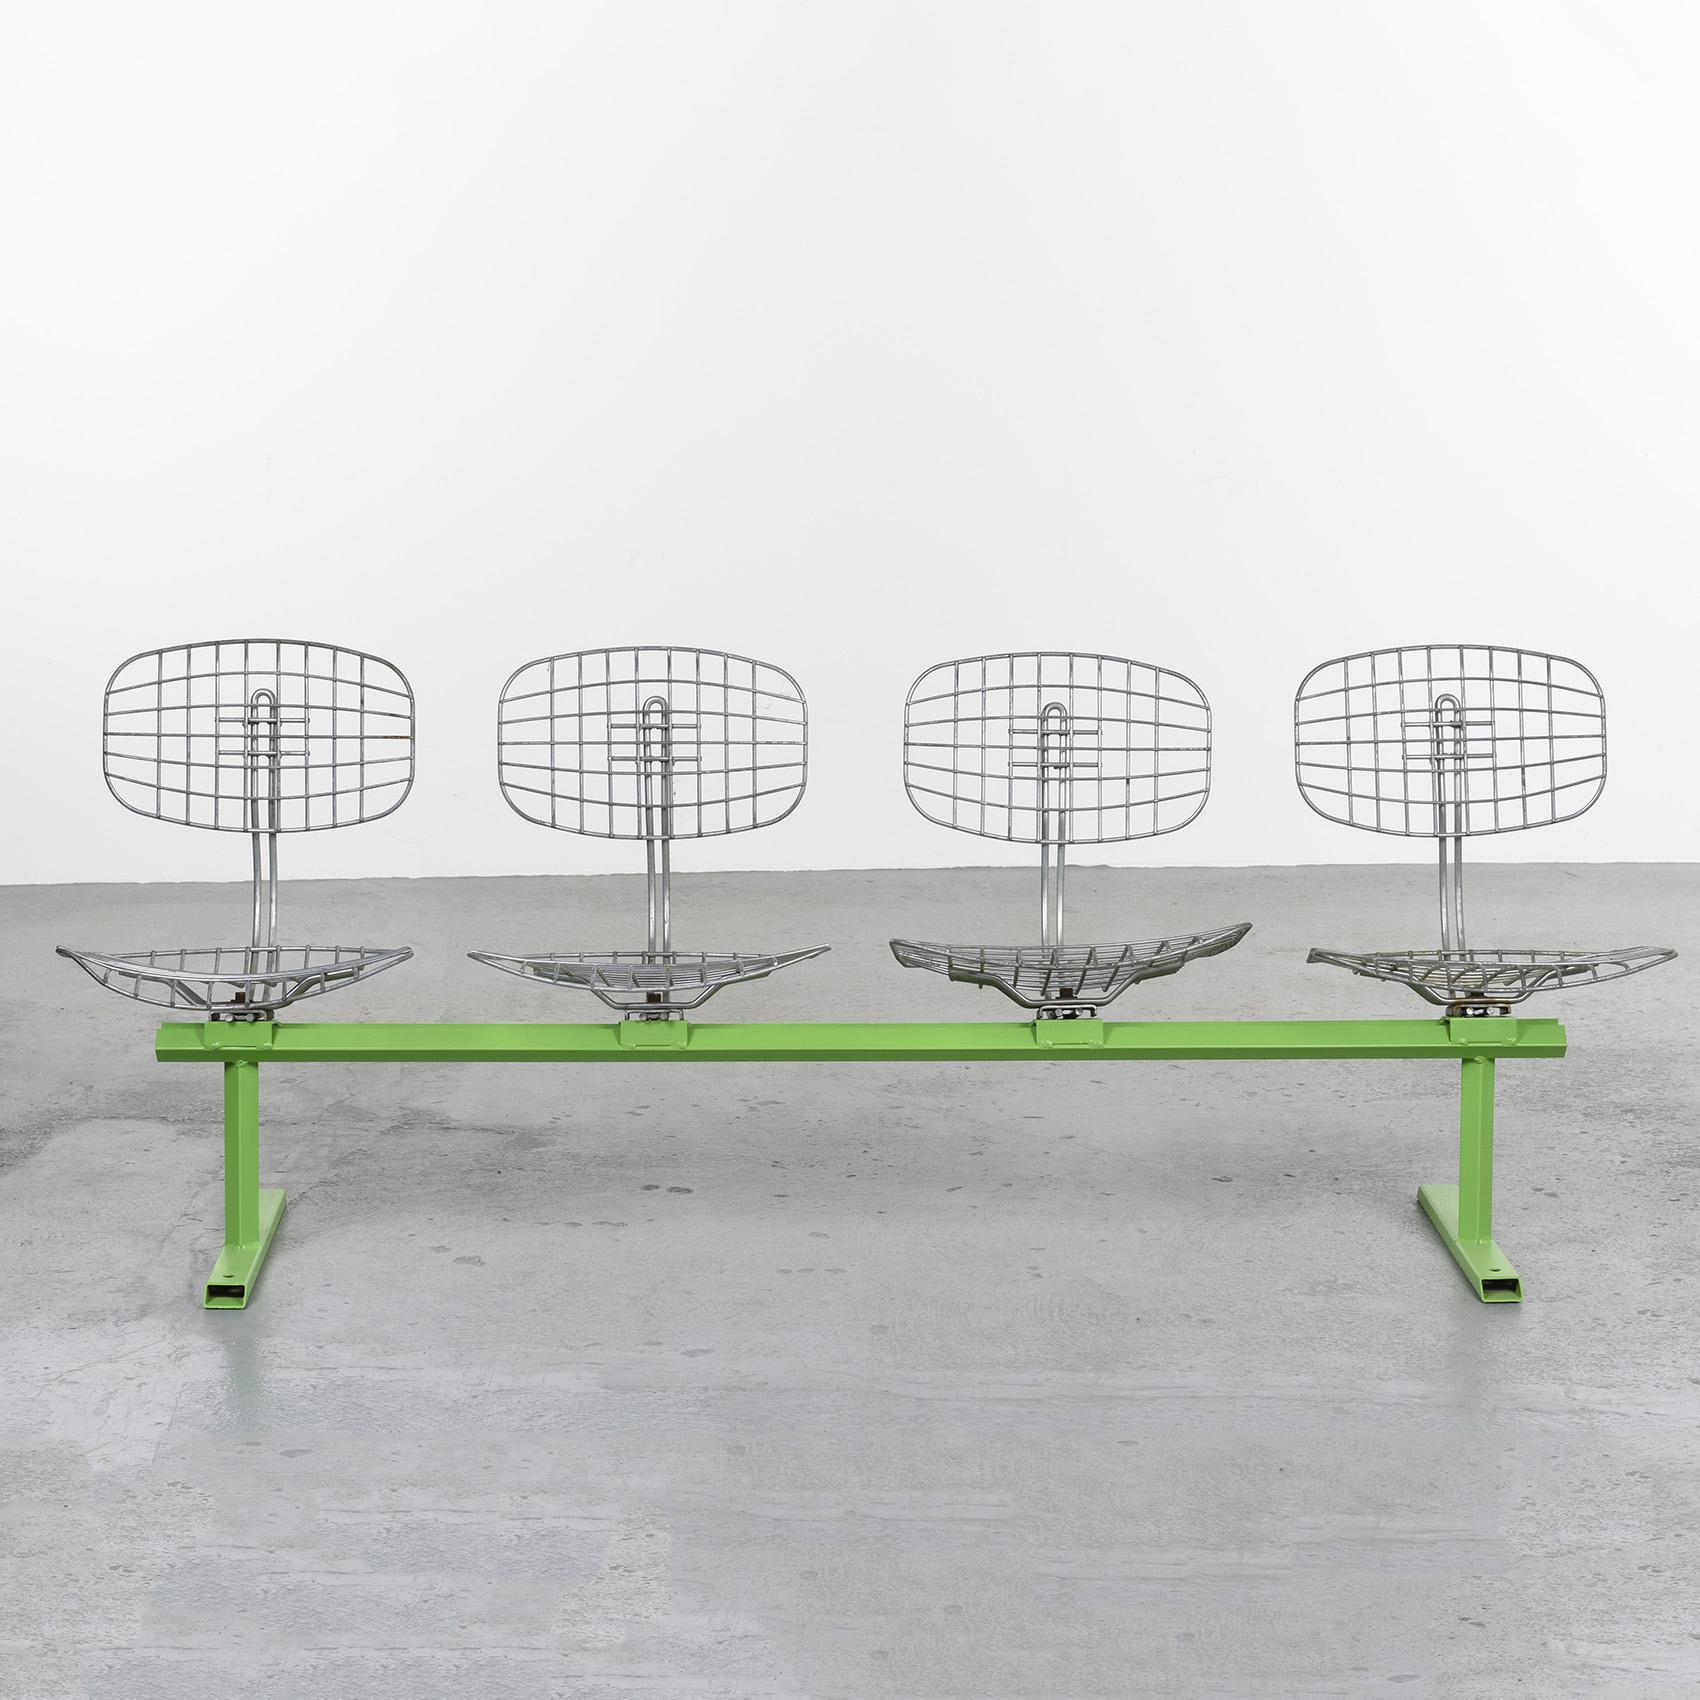 Imagine bringing the essence of a museum into your very own home. 

The Beaubourg bench, originally designed for the prestigious Centre Pompidou in Paris, offers you that opportunity.

With its unique electro-galvanized wire structure from the